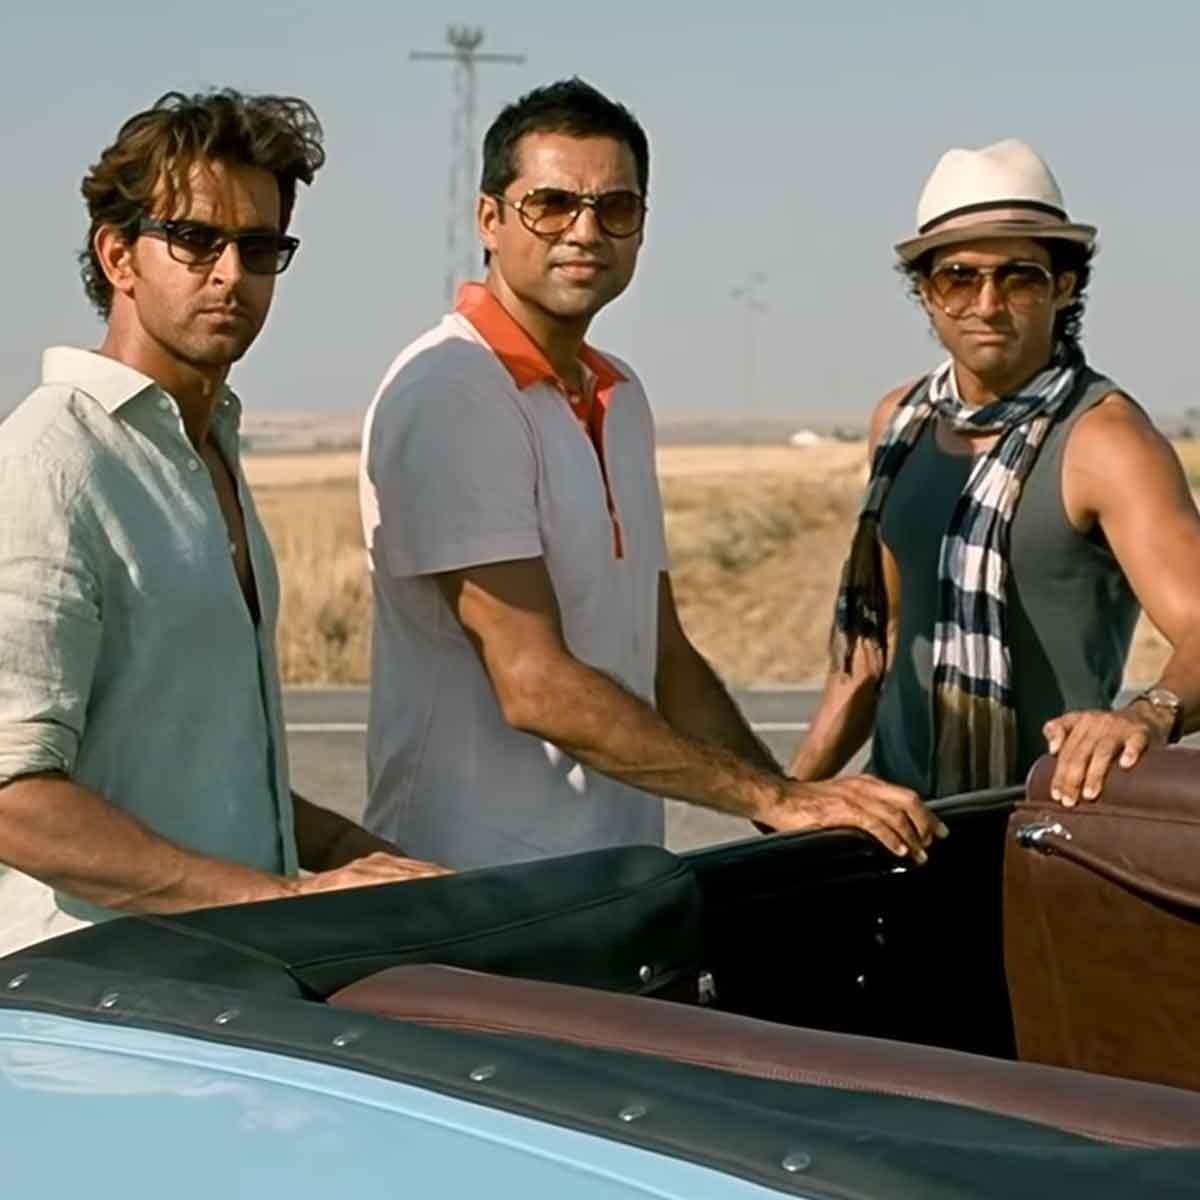 ZNMD celebrates the reunion of childhood friends Arjun, Kabir, and Imran during an epic road trip in Spain. As they embark on thrilling adventures like skydiving and bull running, they rediscover the essence of life and friendship.